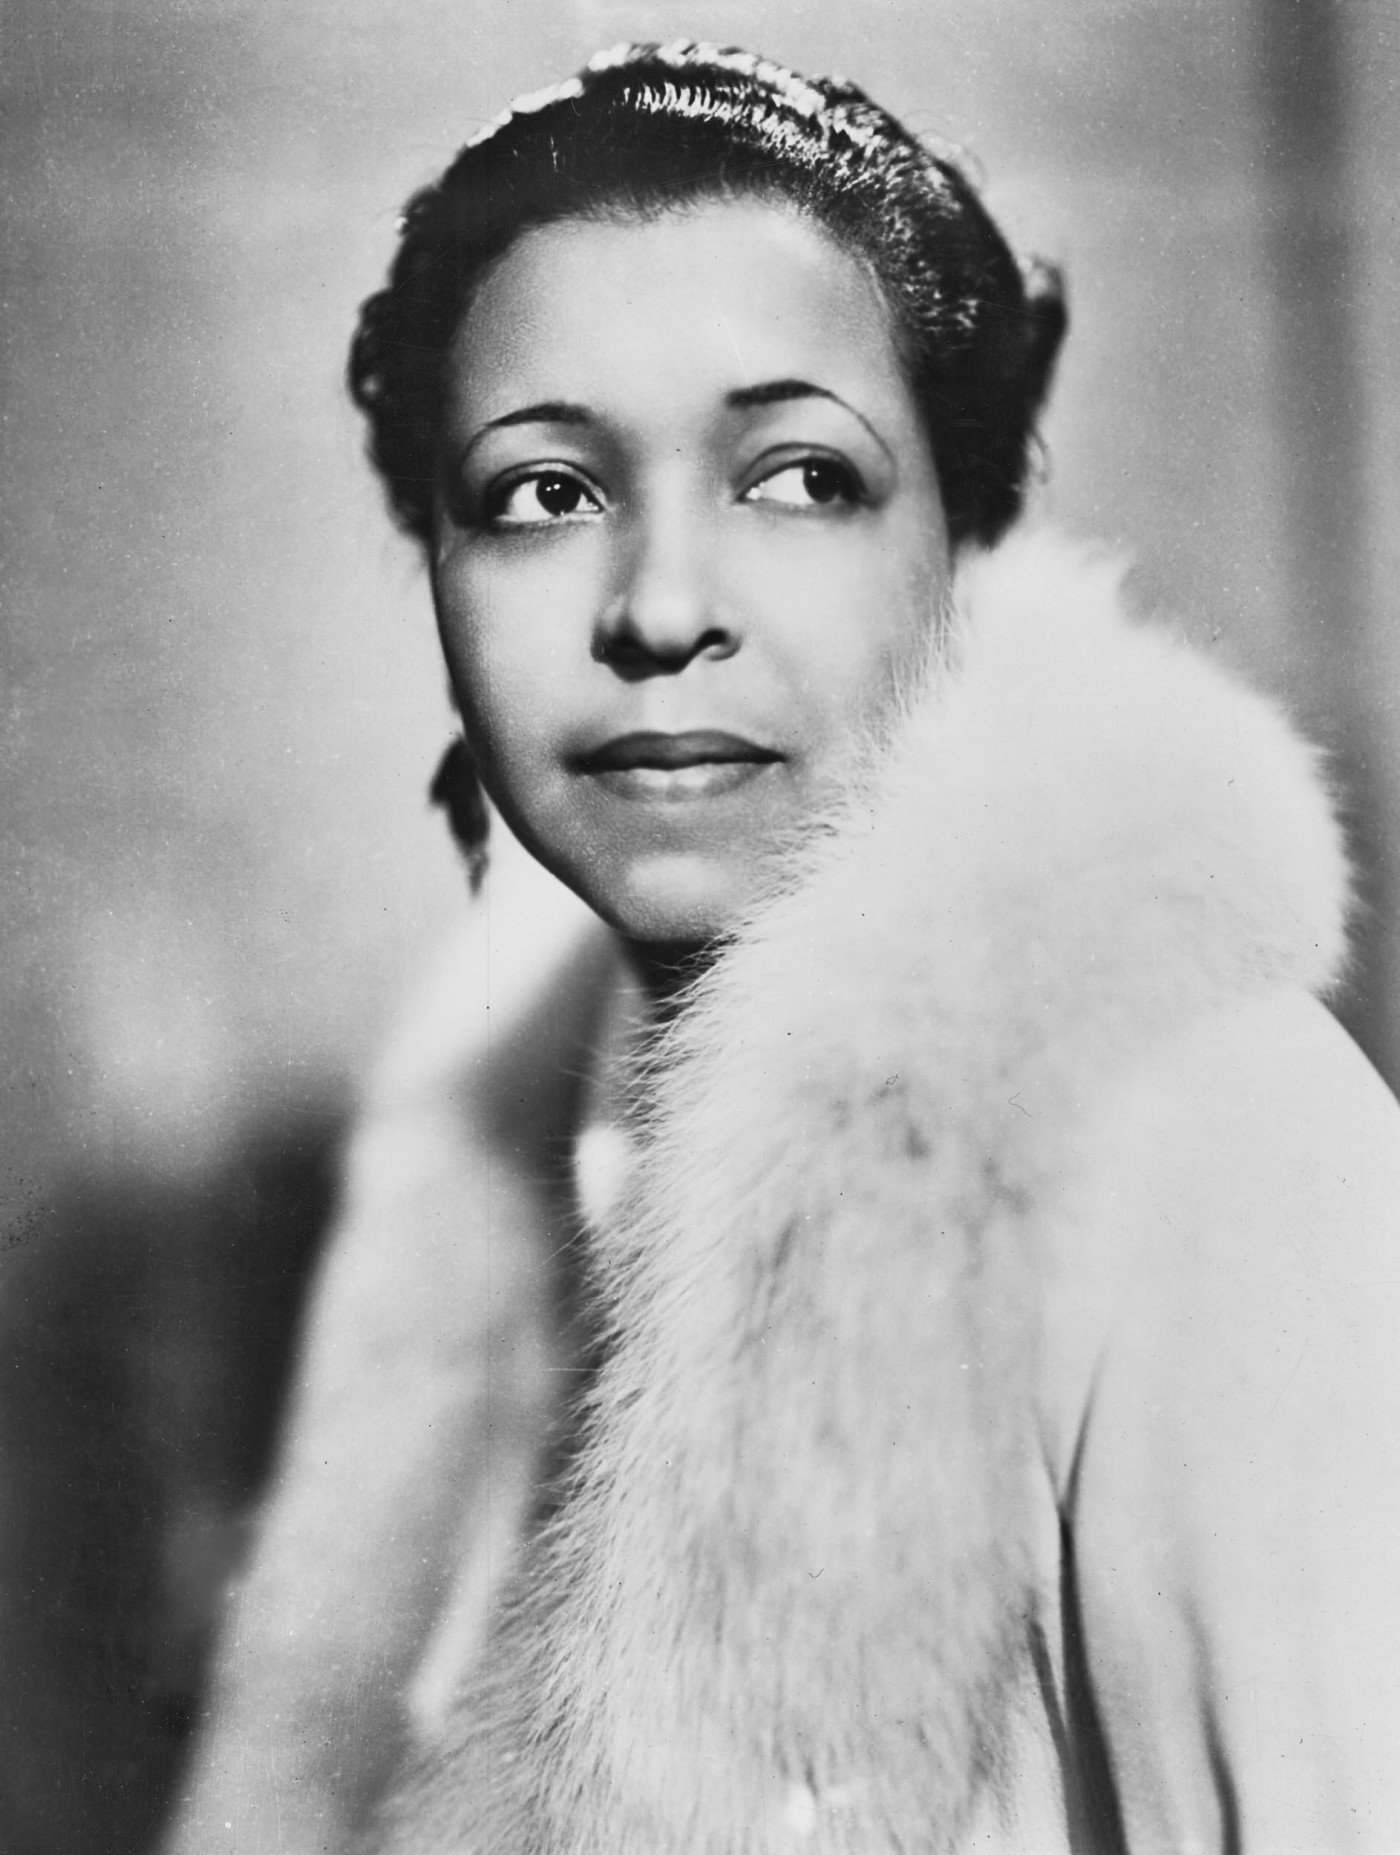 Photograph of Ethel Waters